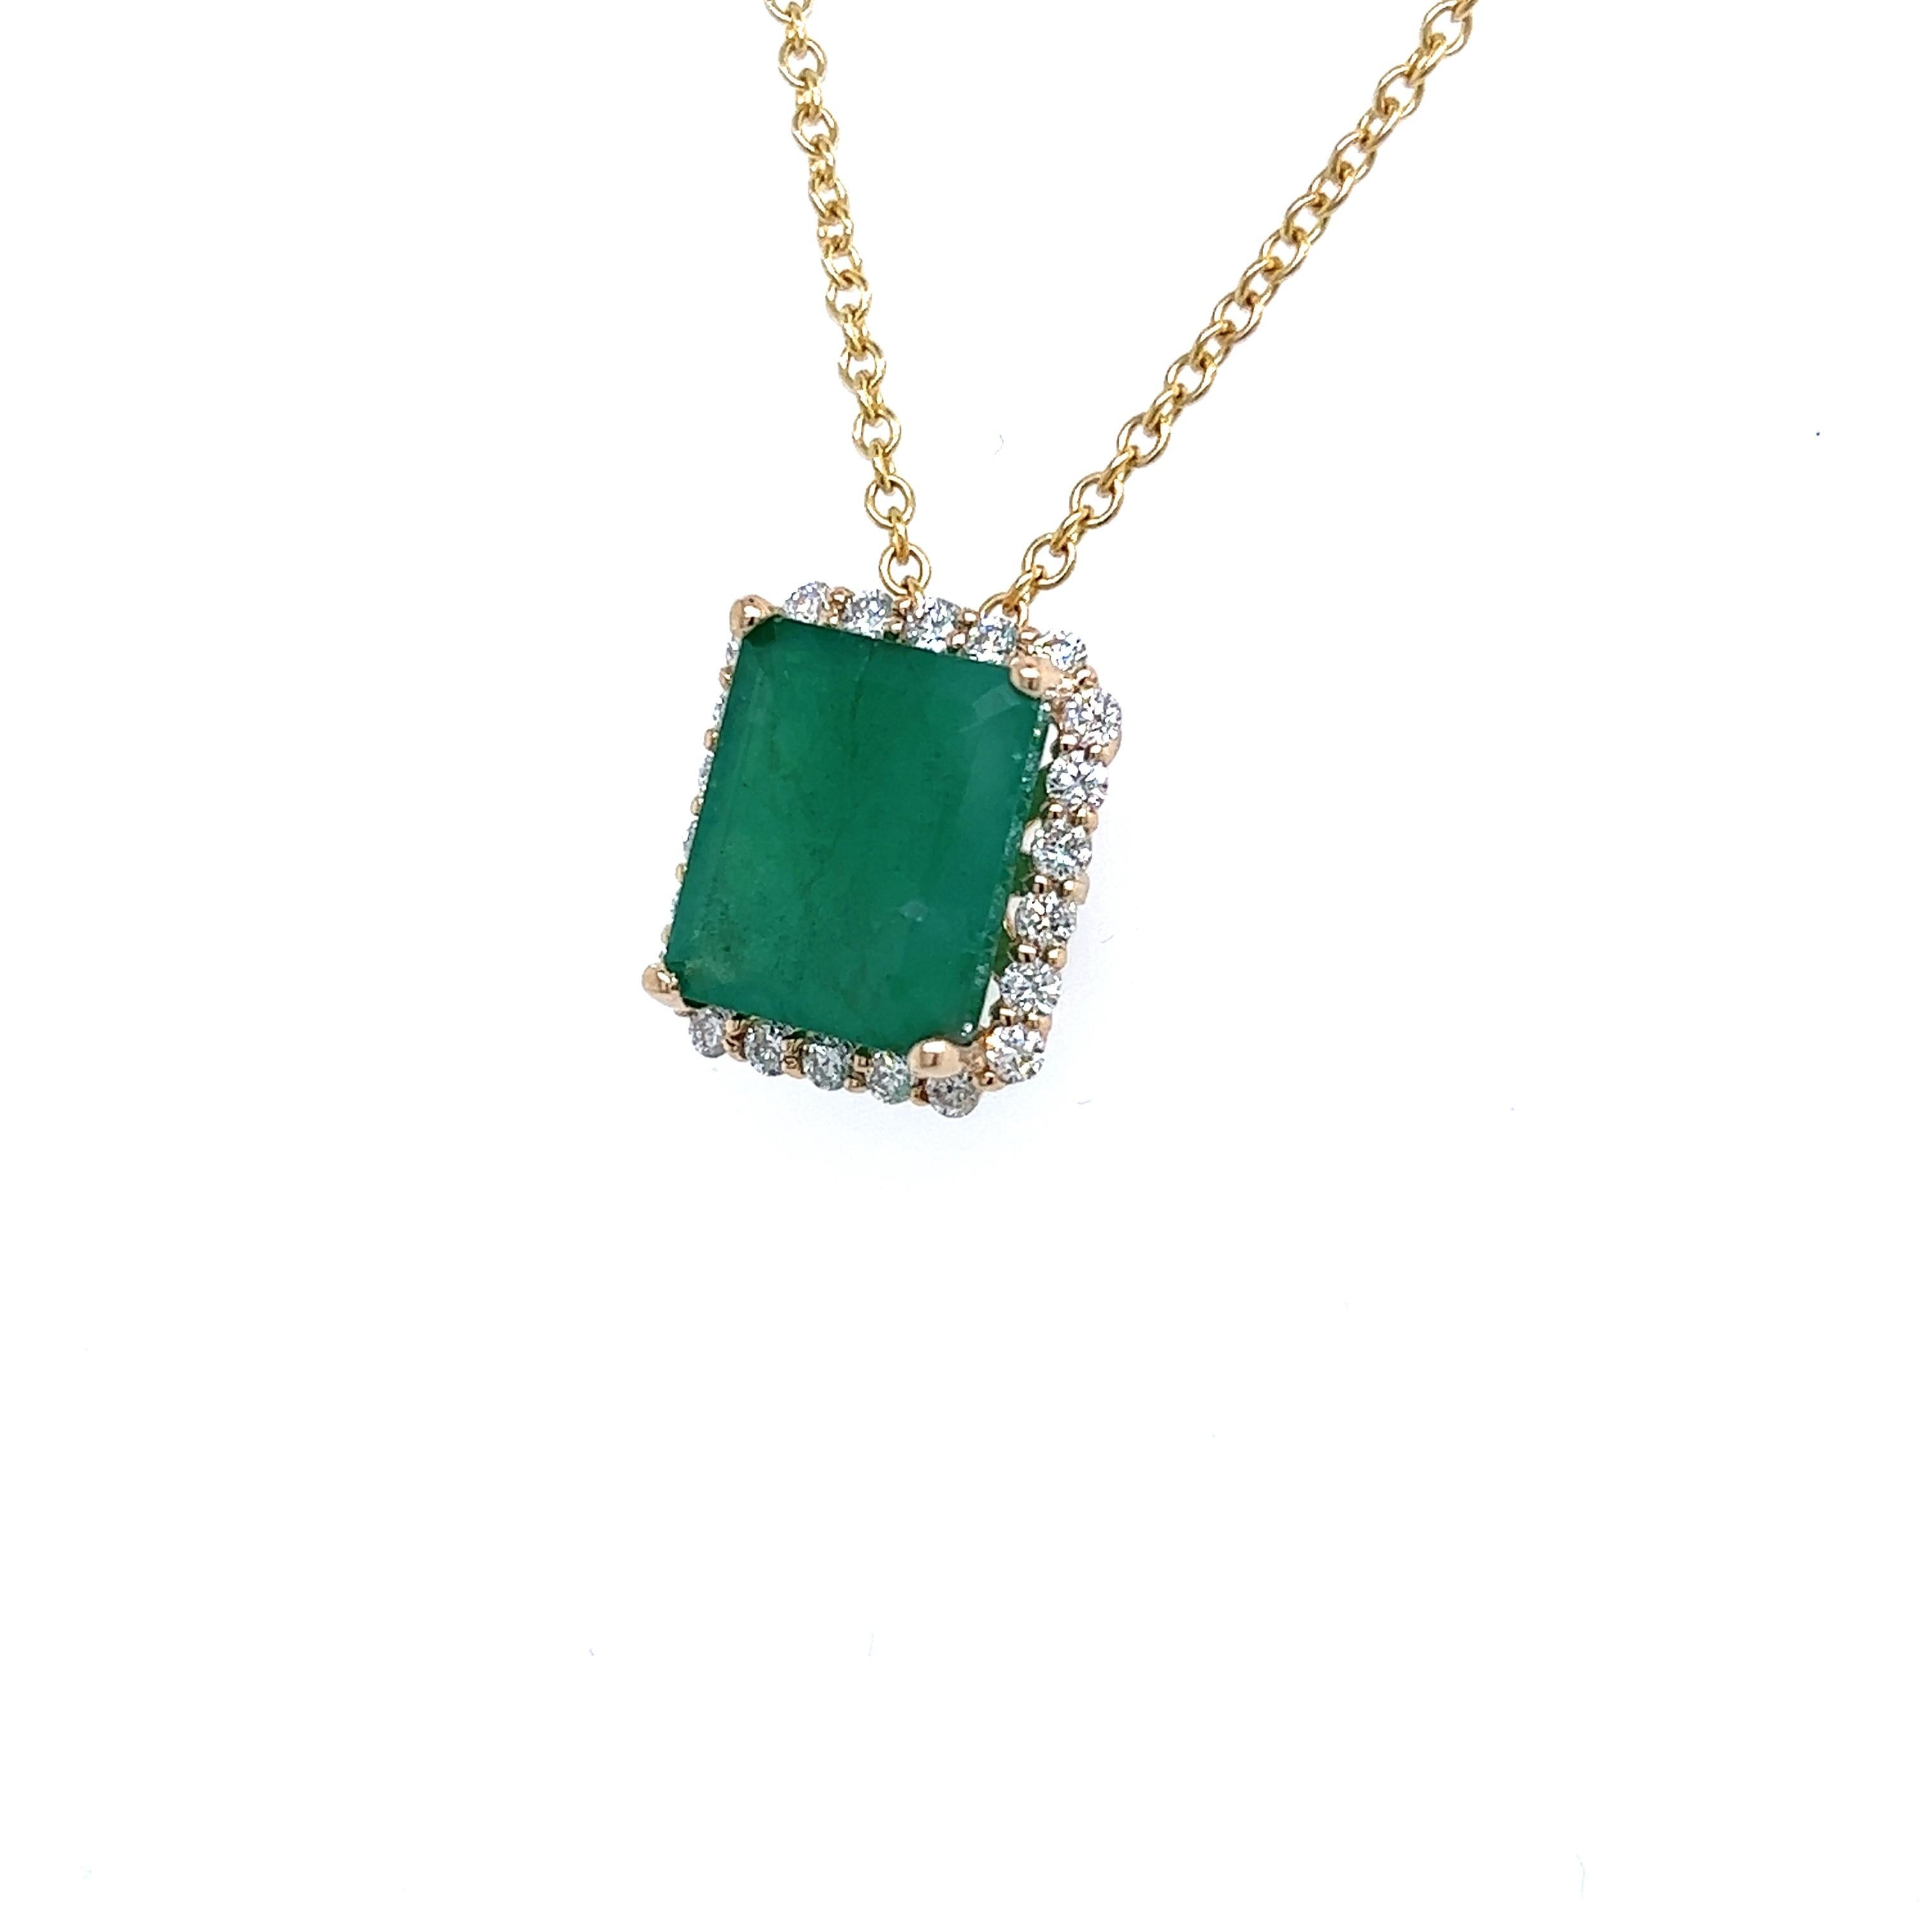 Natural Emerald Diamond Pendant Necklace 14k Yellow Gold 5.05 TCW Certified For Sale 1